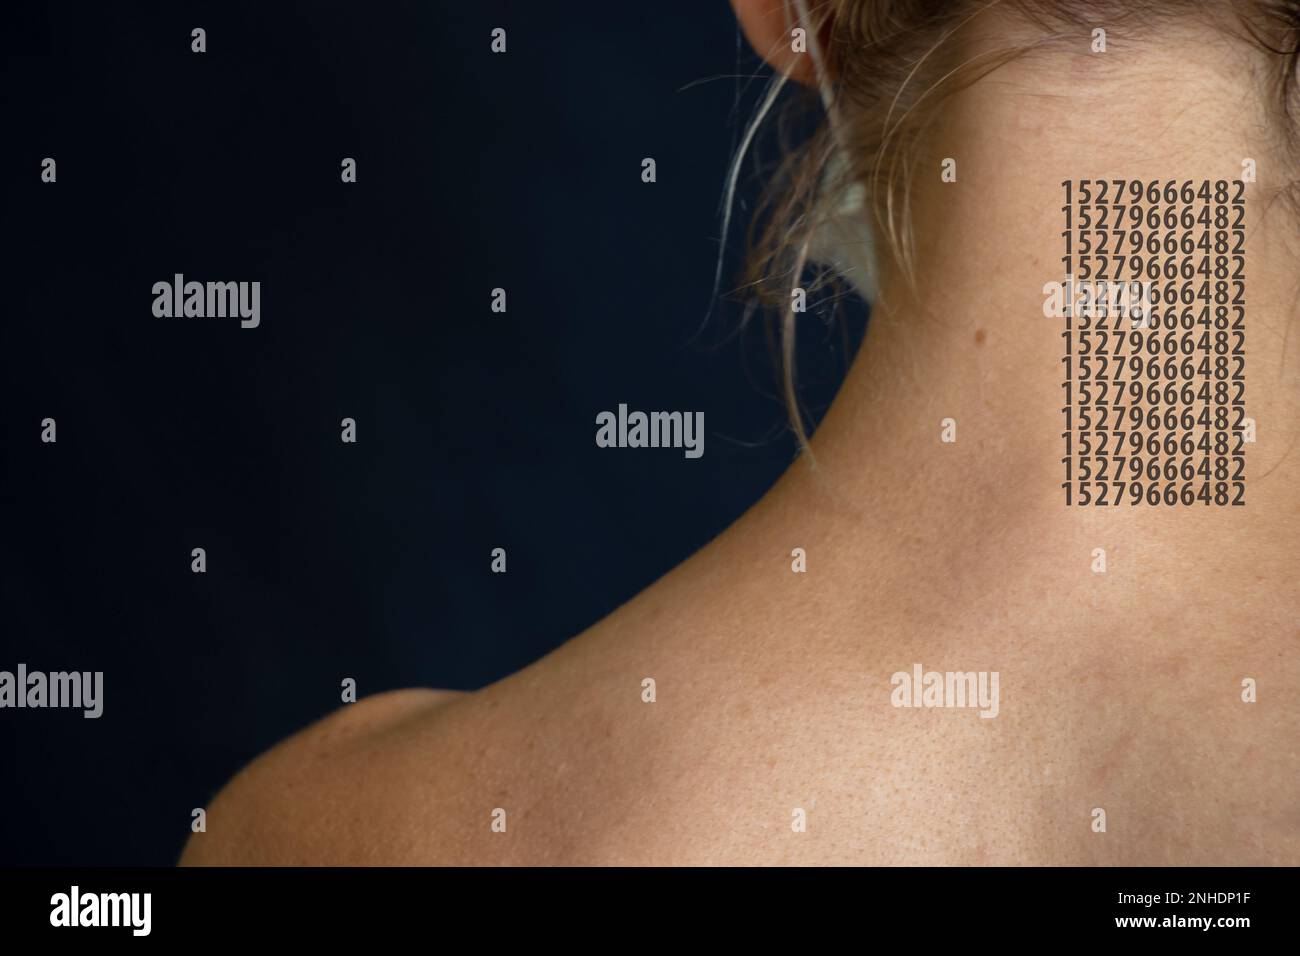 a series of numbers on a woman's body, the law on assigning a number to a person, assigning a number to a person Stock Photo